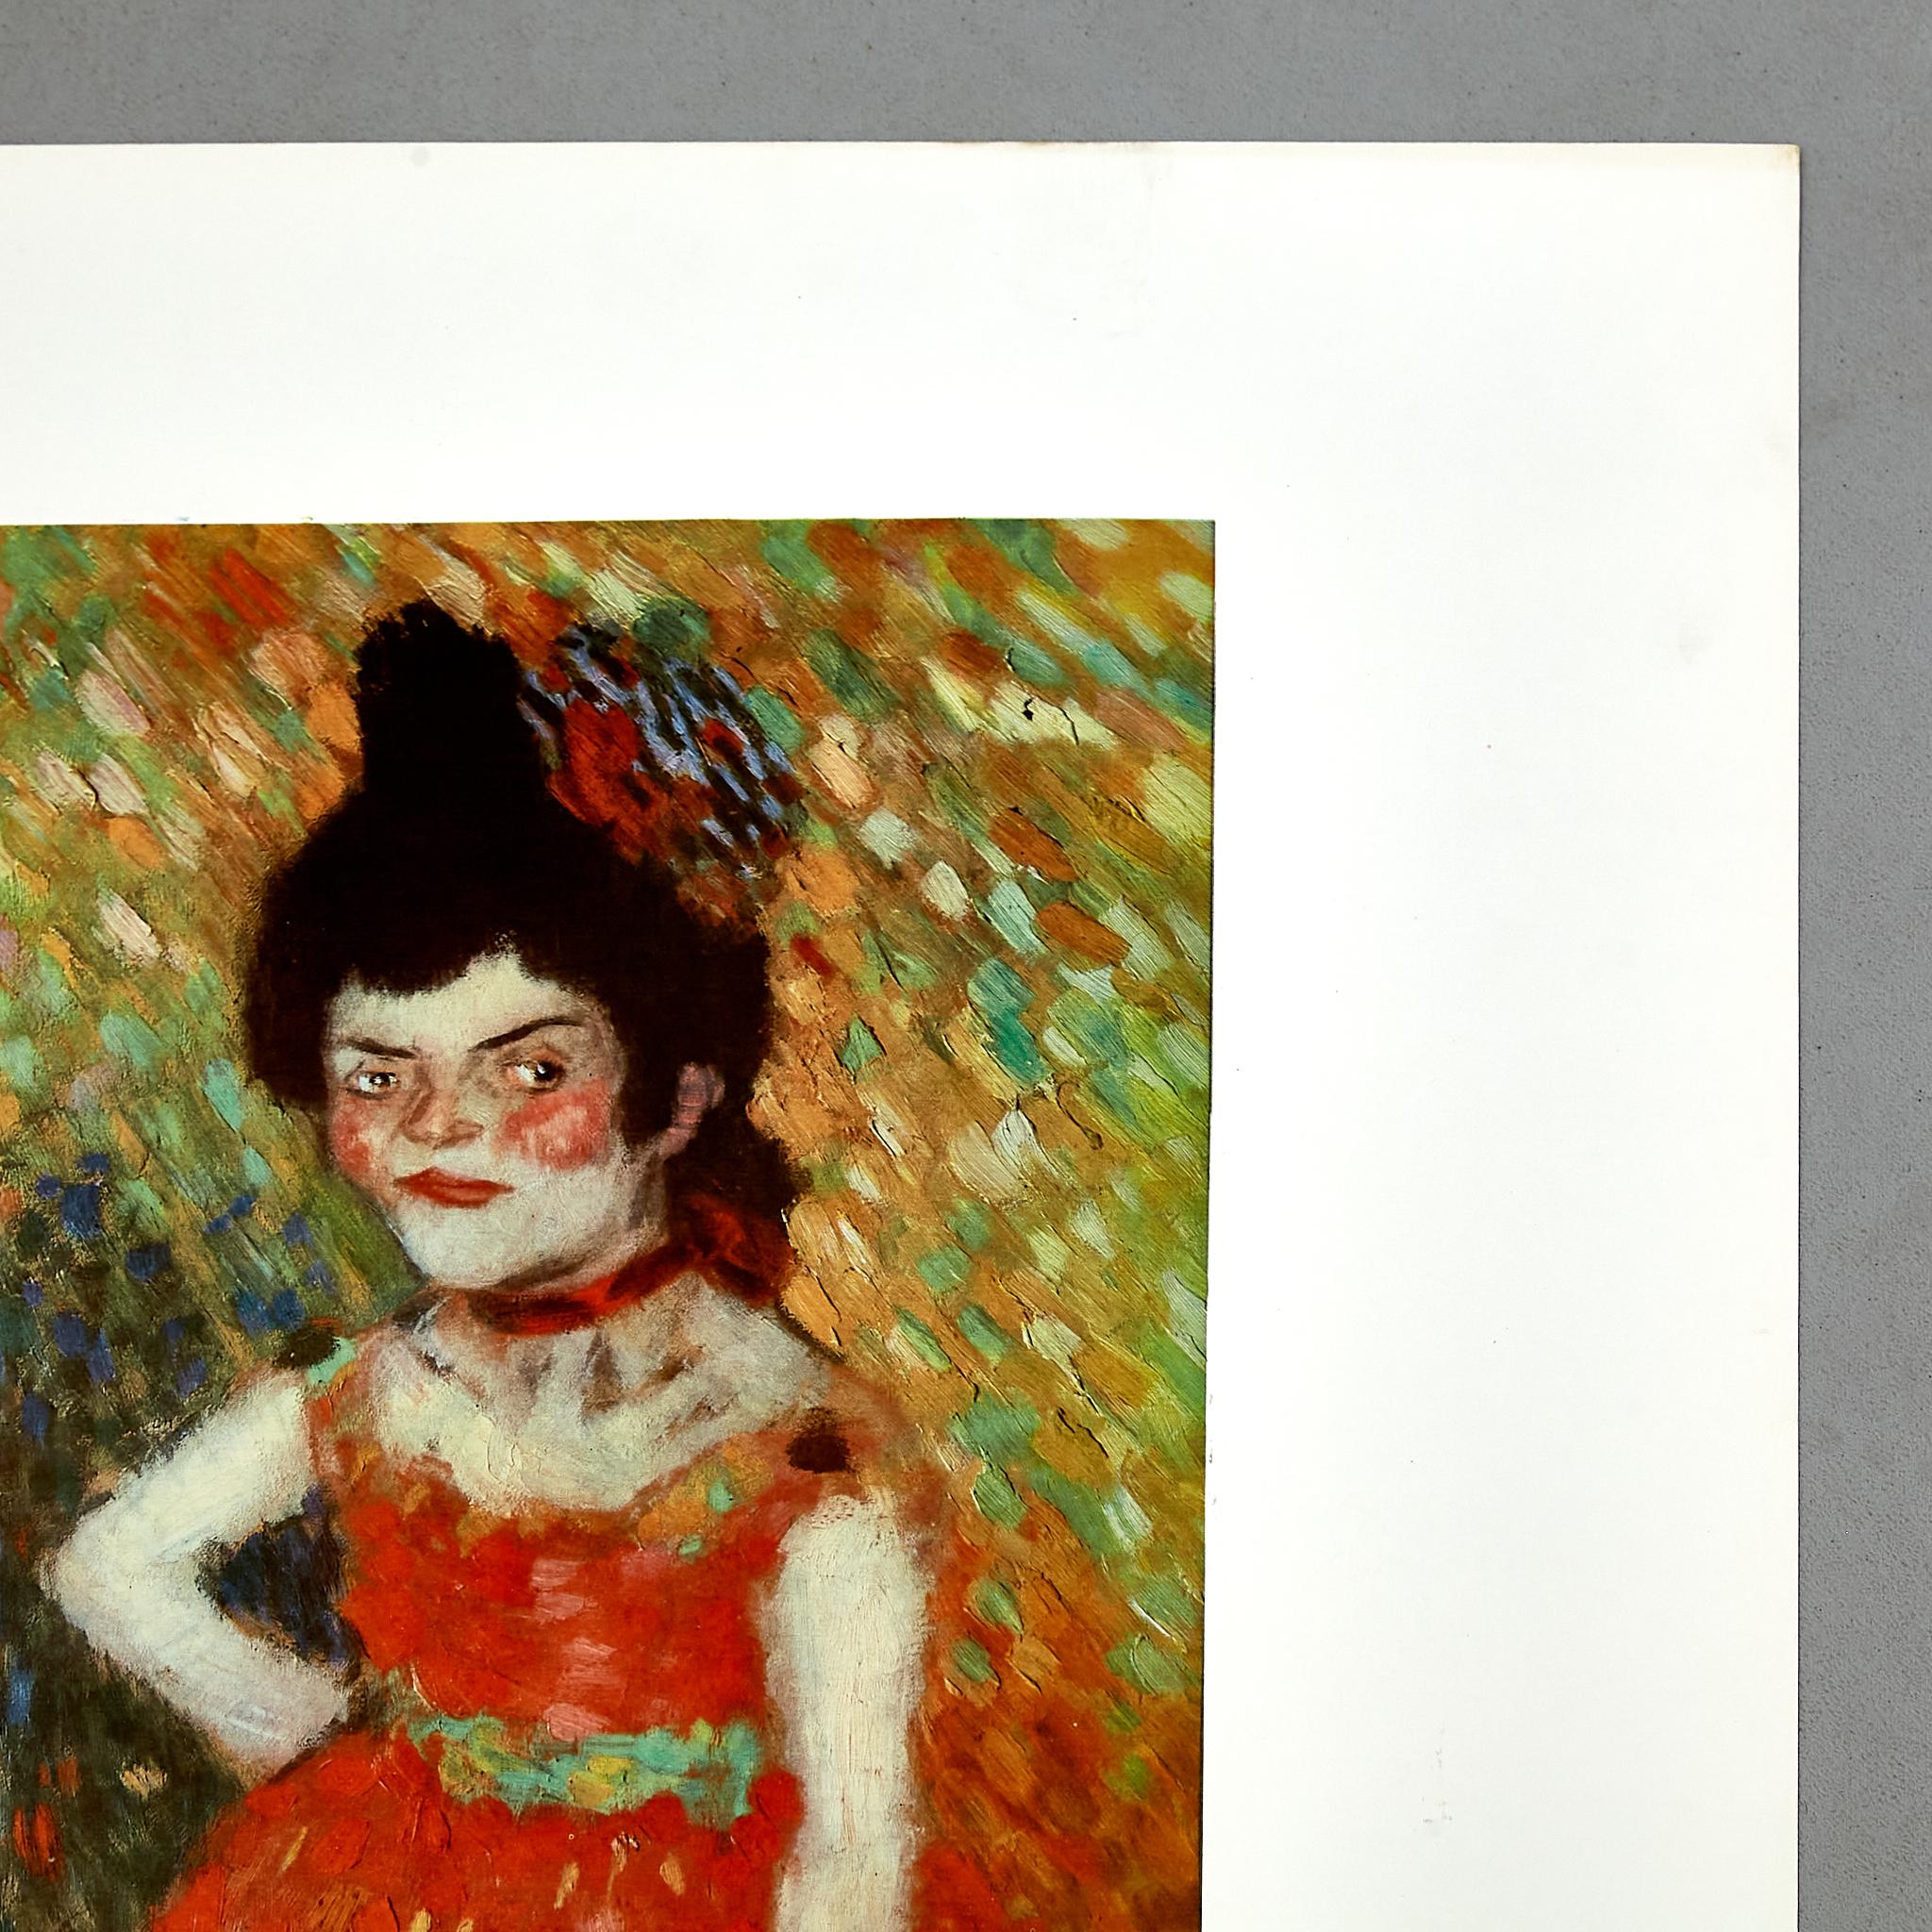 Spanish High Quality Print of Danseuse Naine 1901 by Pablo Picasso, circa 1966. For Sale